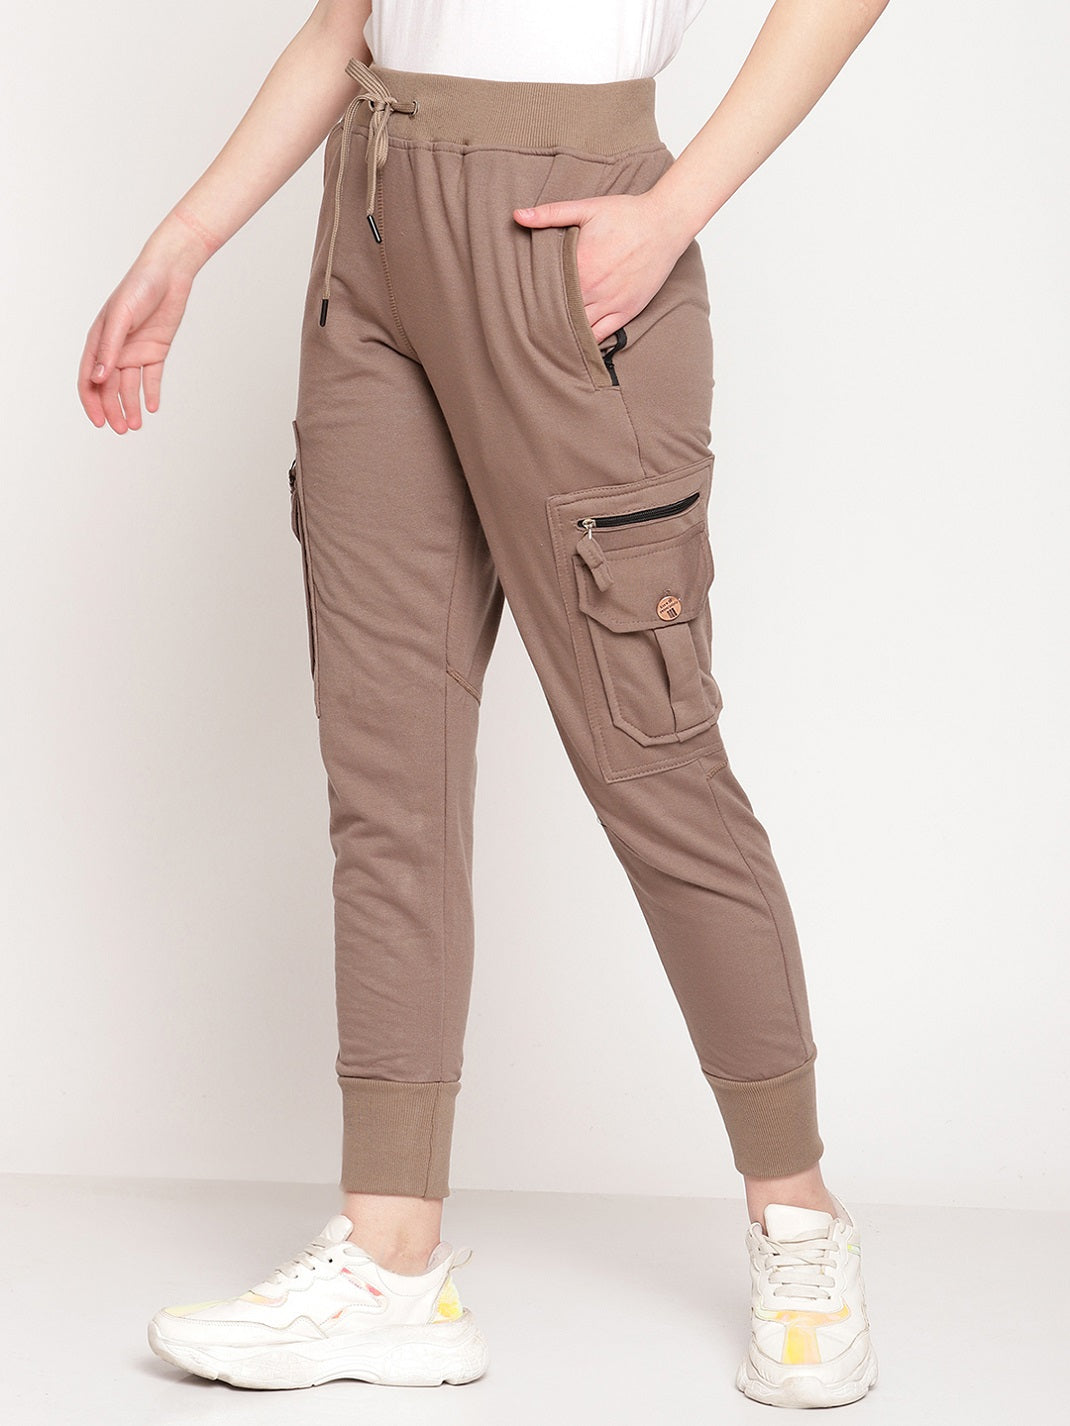 Y A FASHION COLLECTION Women's Regular Casual Pants, Solid Grey track Pants,  stretchable Lower and Trouser for